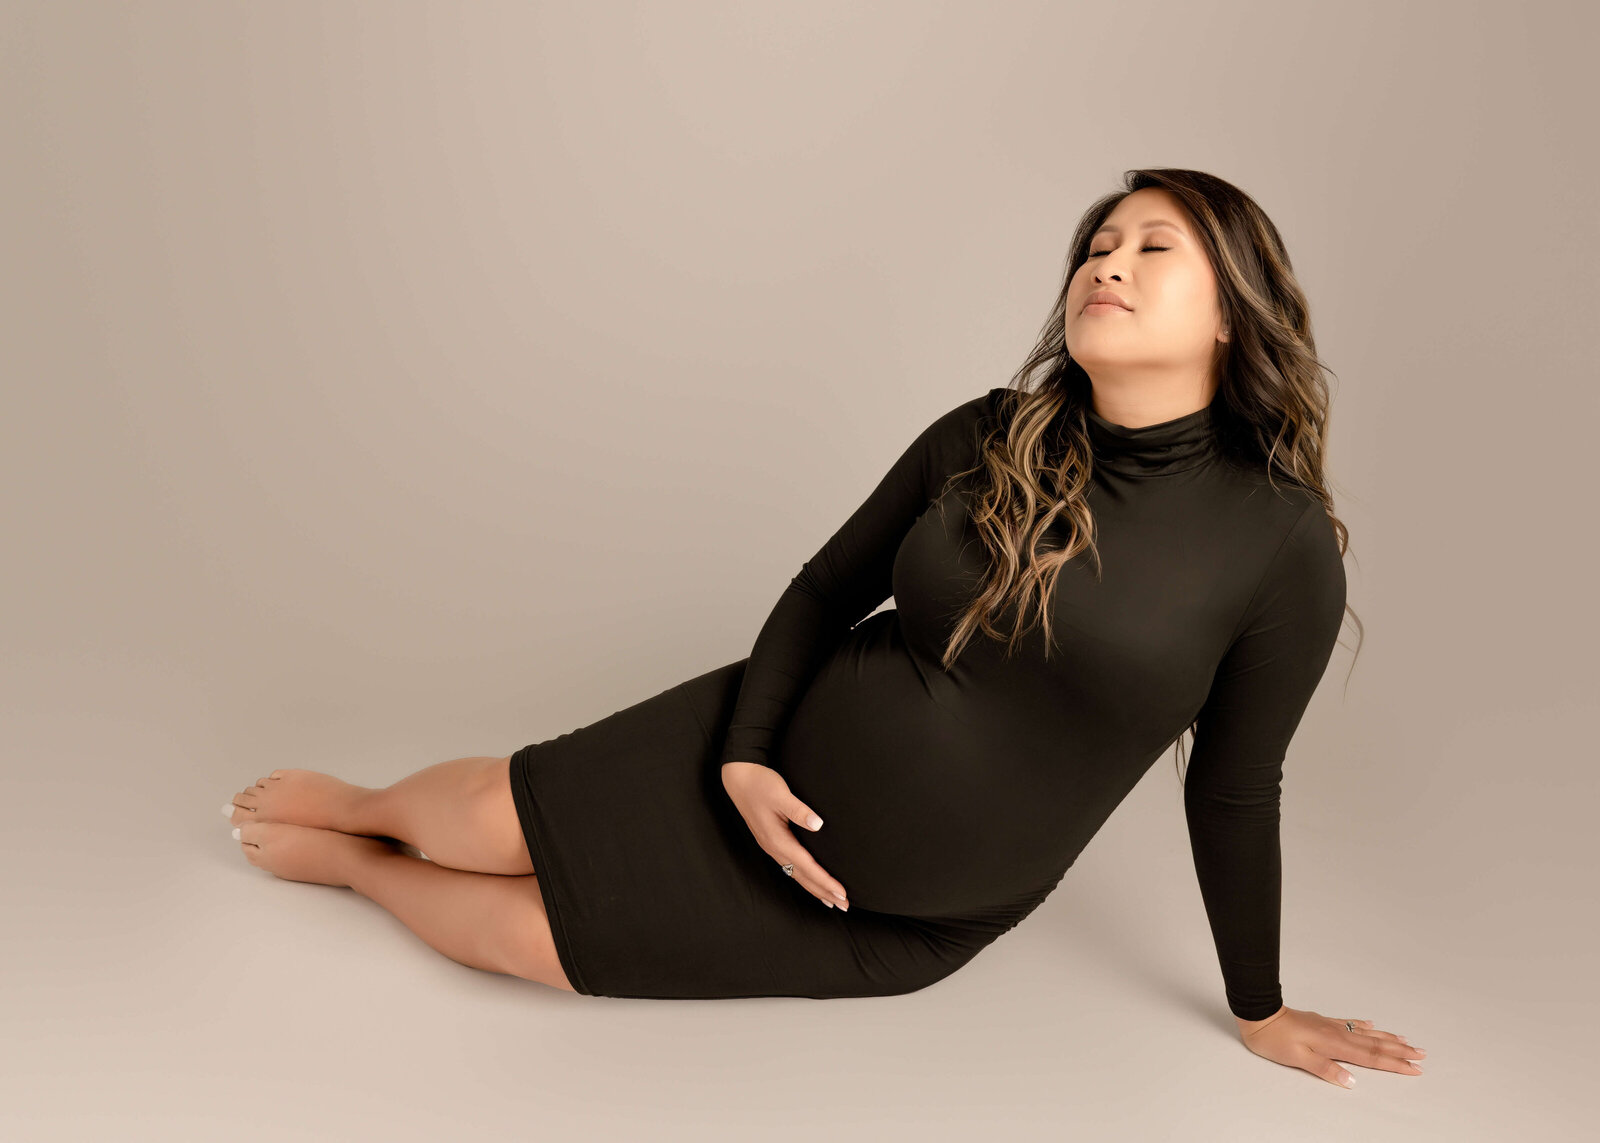 Expectant mom in studio maternity session sitting on floor looking up dreaming about her baby in Orange County, CA by Ashley Nicole.